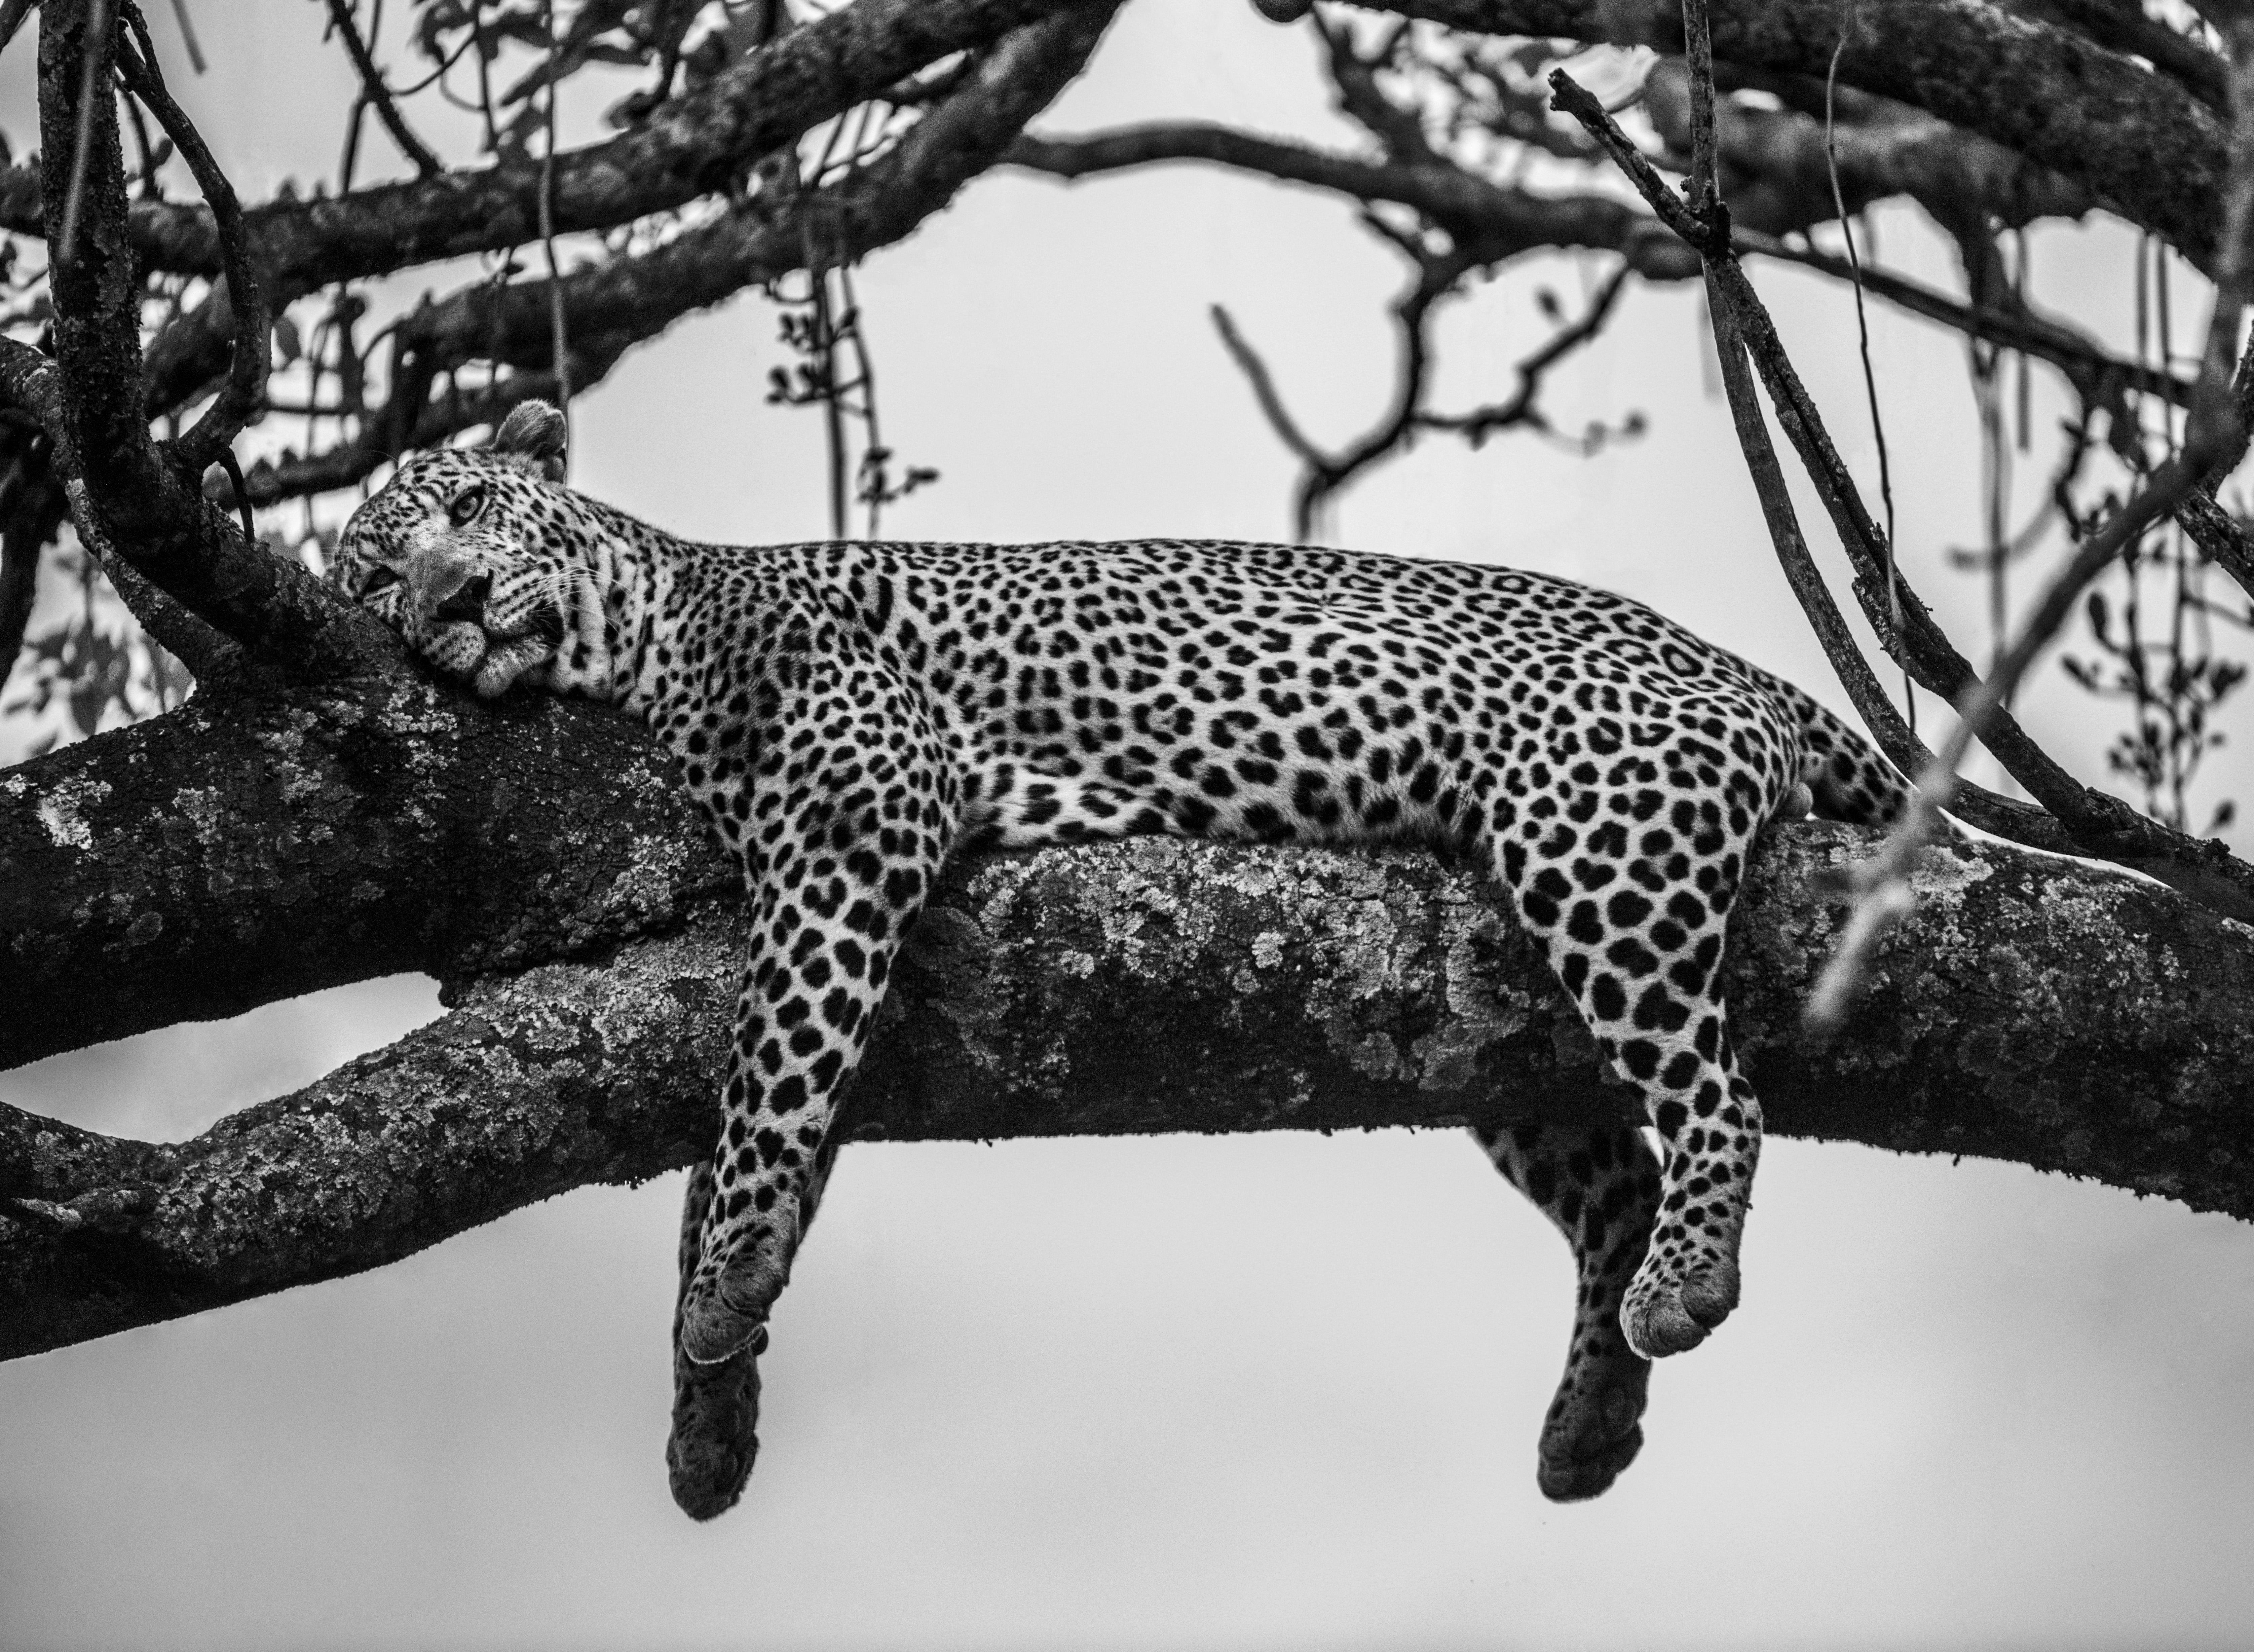 "Watching a leopard lying graciously in a tree with its legs dangling from a branch has been a moment I have always been eager to witness since my very first visit to Kenya. On that first visit, I spent a few nights in the Maasai Mara, and we did